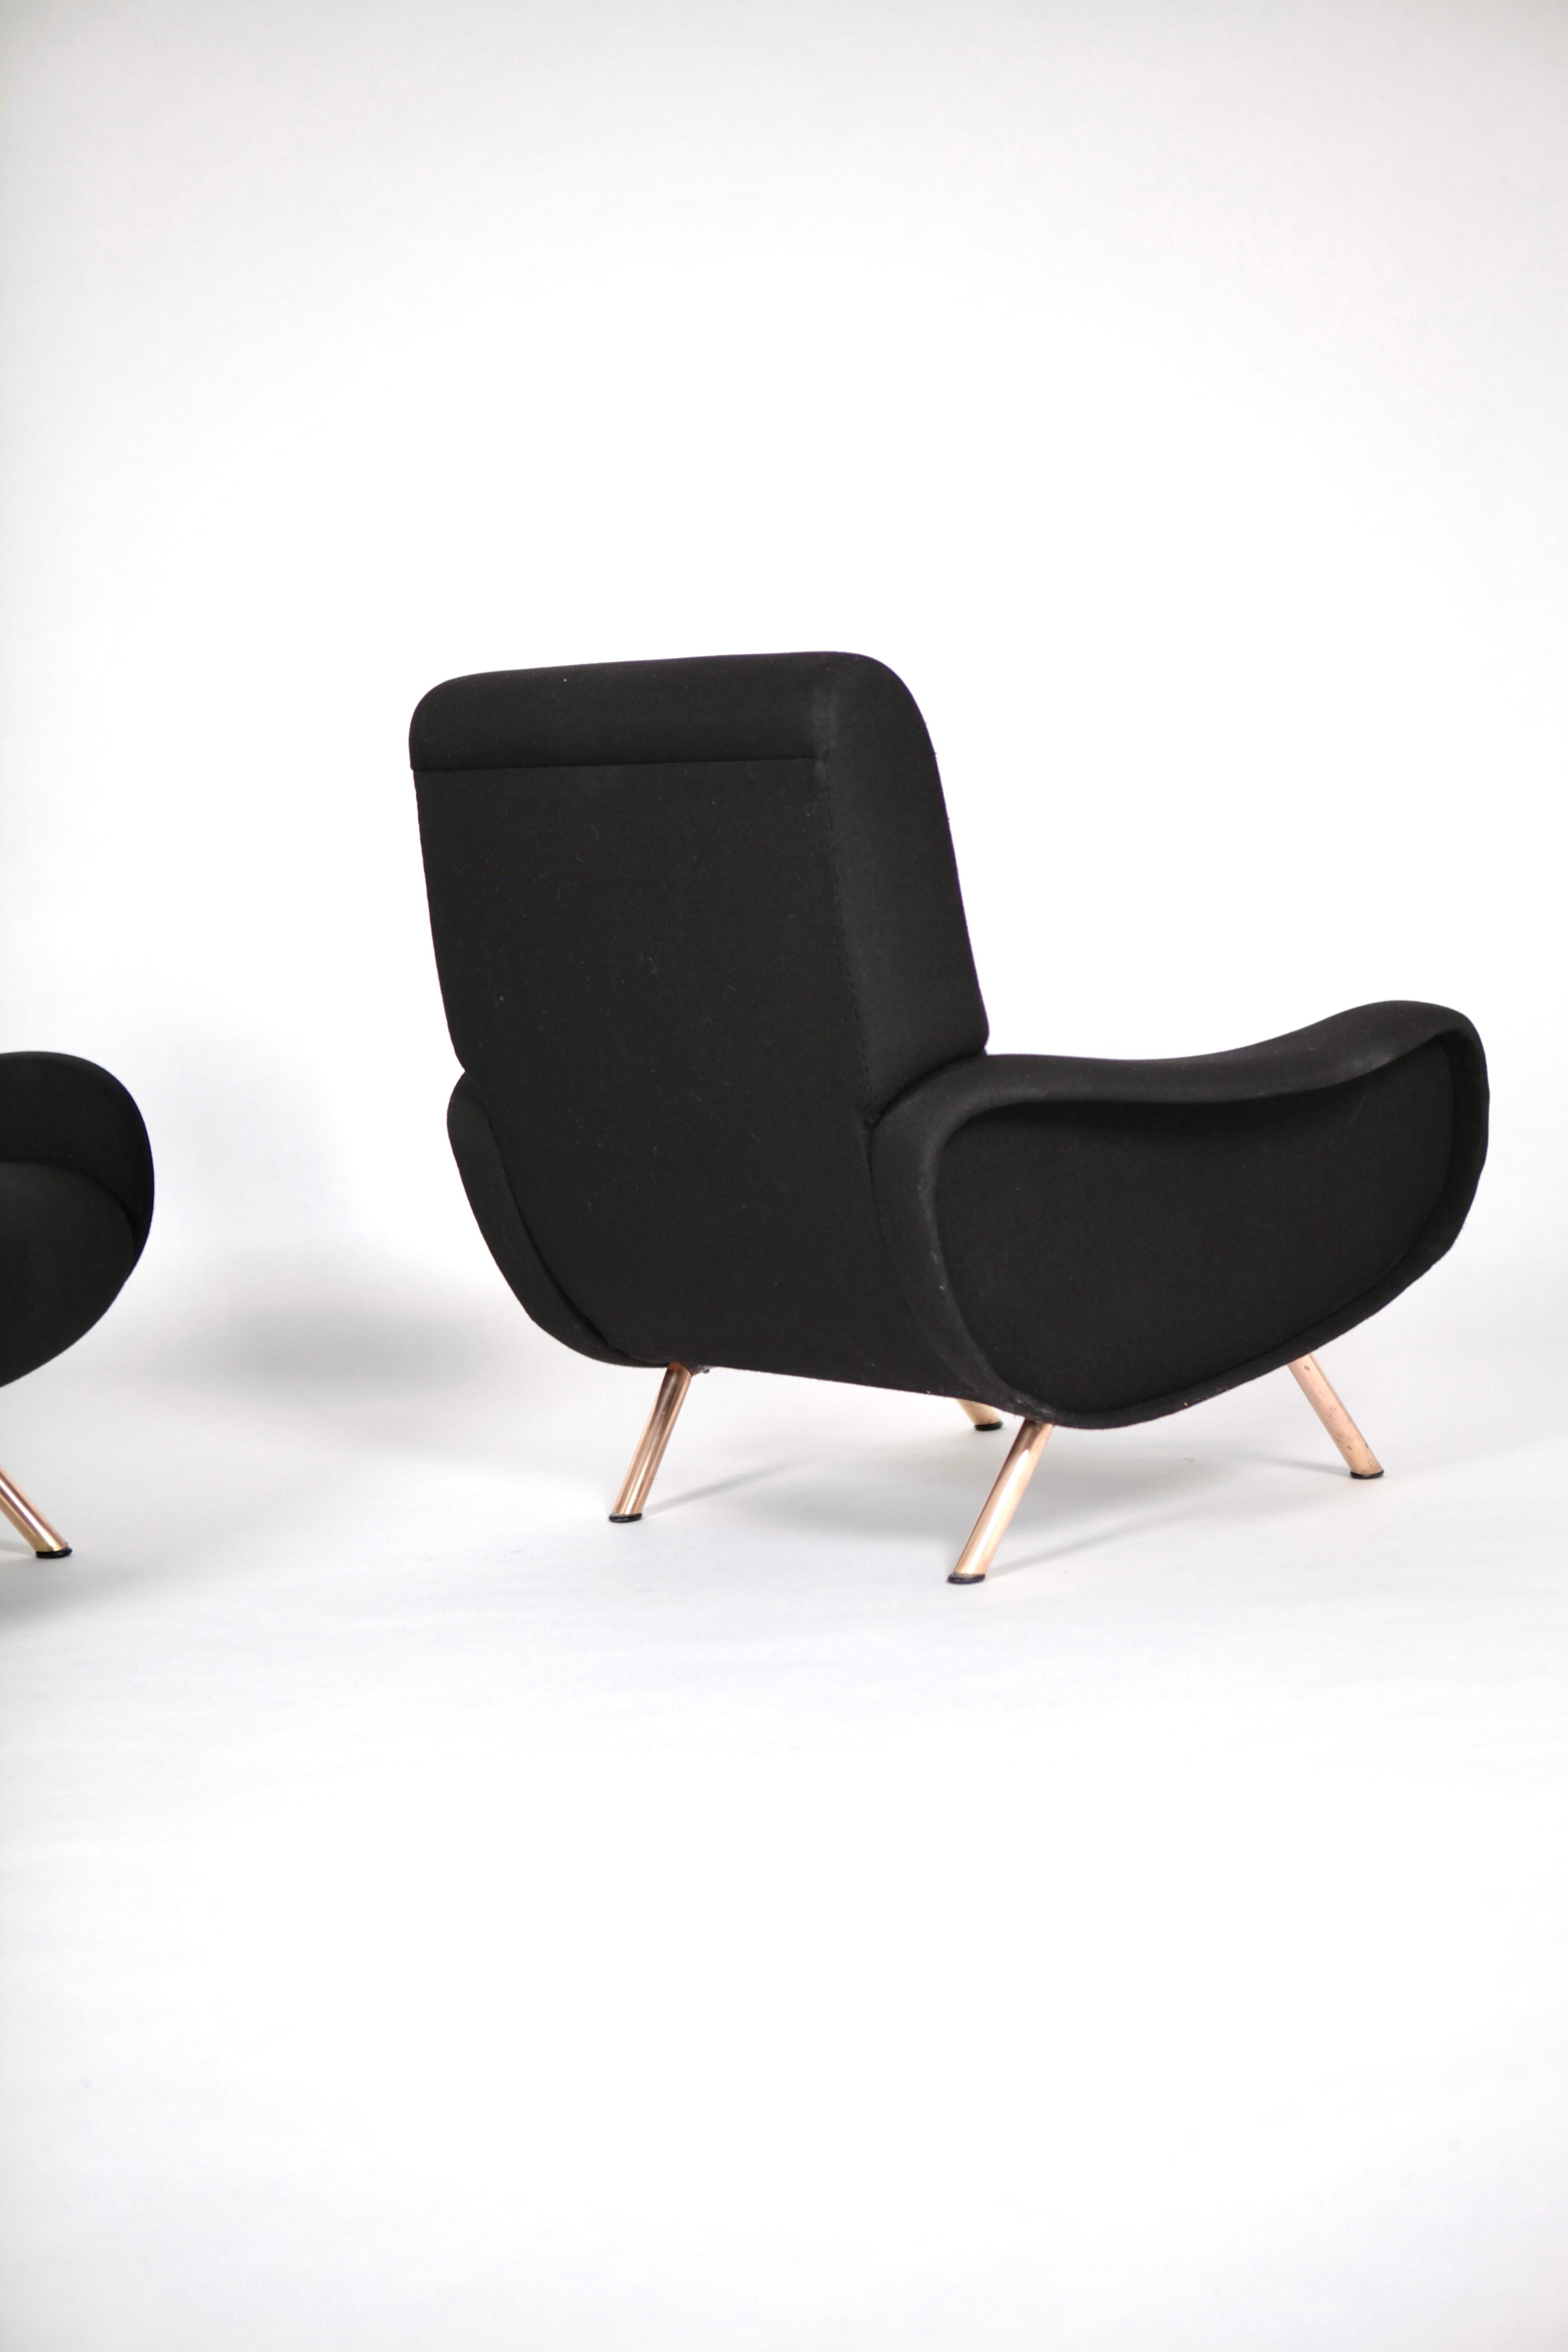 Mid-20th Century Marco Zanuso 'Lady' Chairs, Early Arflex Edition, circa 1951 For Sale